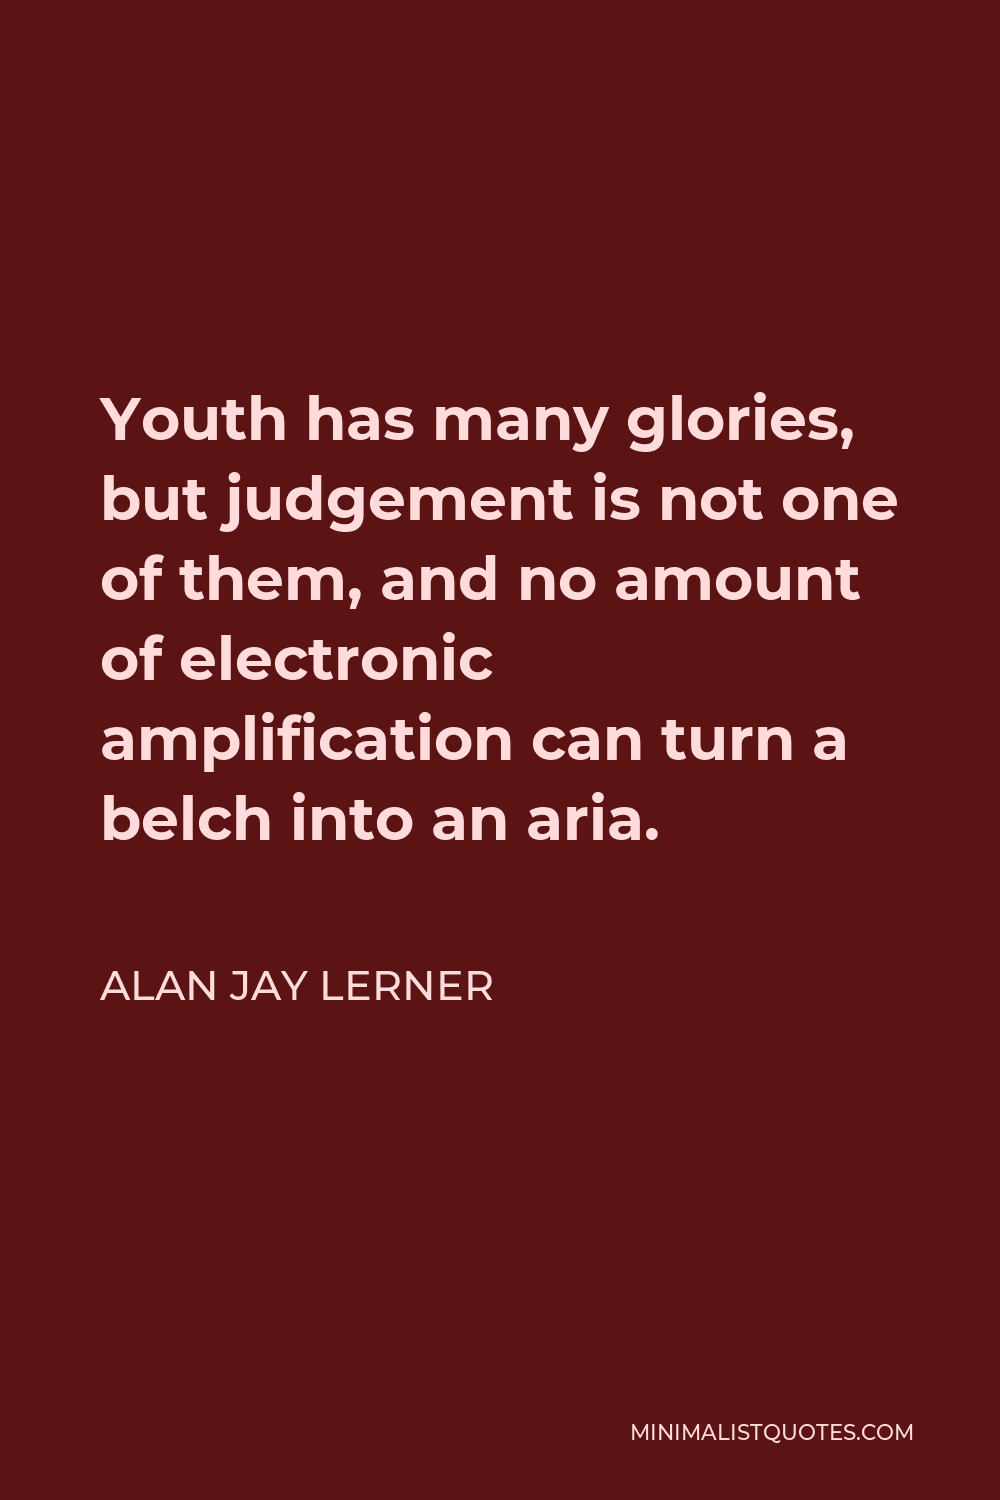 Alan Jay Lerner Quote - Youth has many glories, but judgement is not one of them, and no amount of electronic amplification can turn a belch into an aria.